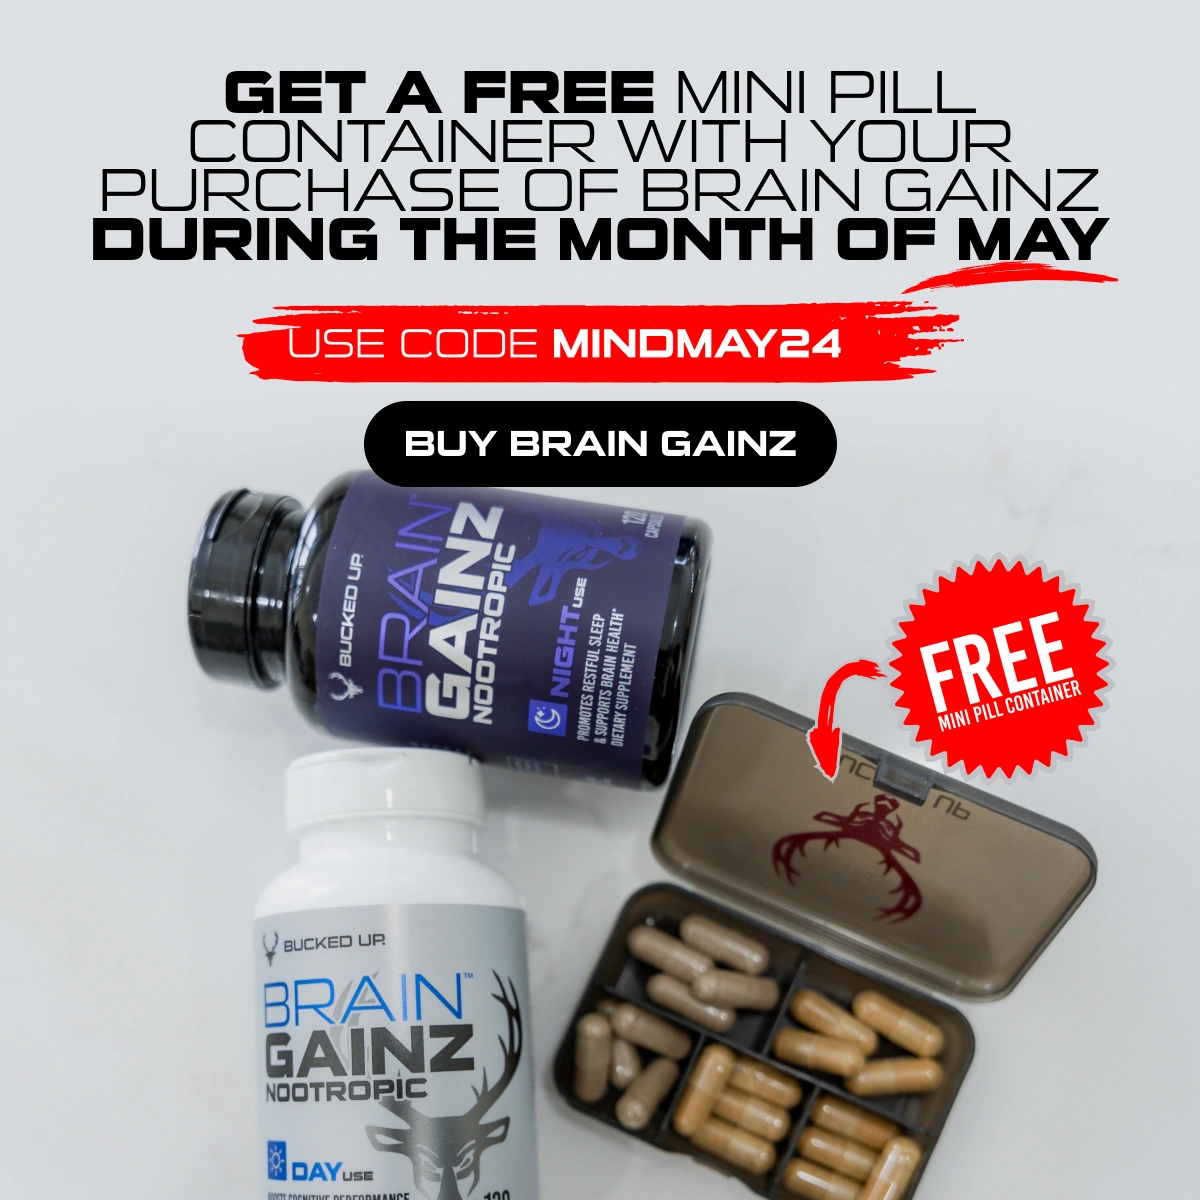 Mind May - Text says "get a free mini pill container with your purchase of brain gainz during the month of may.  Use code MINDMAY24." Button reads "buy brain gainz", and subtext reads "free mini pill container".  Image is of